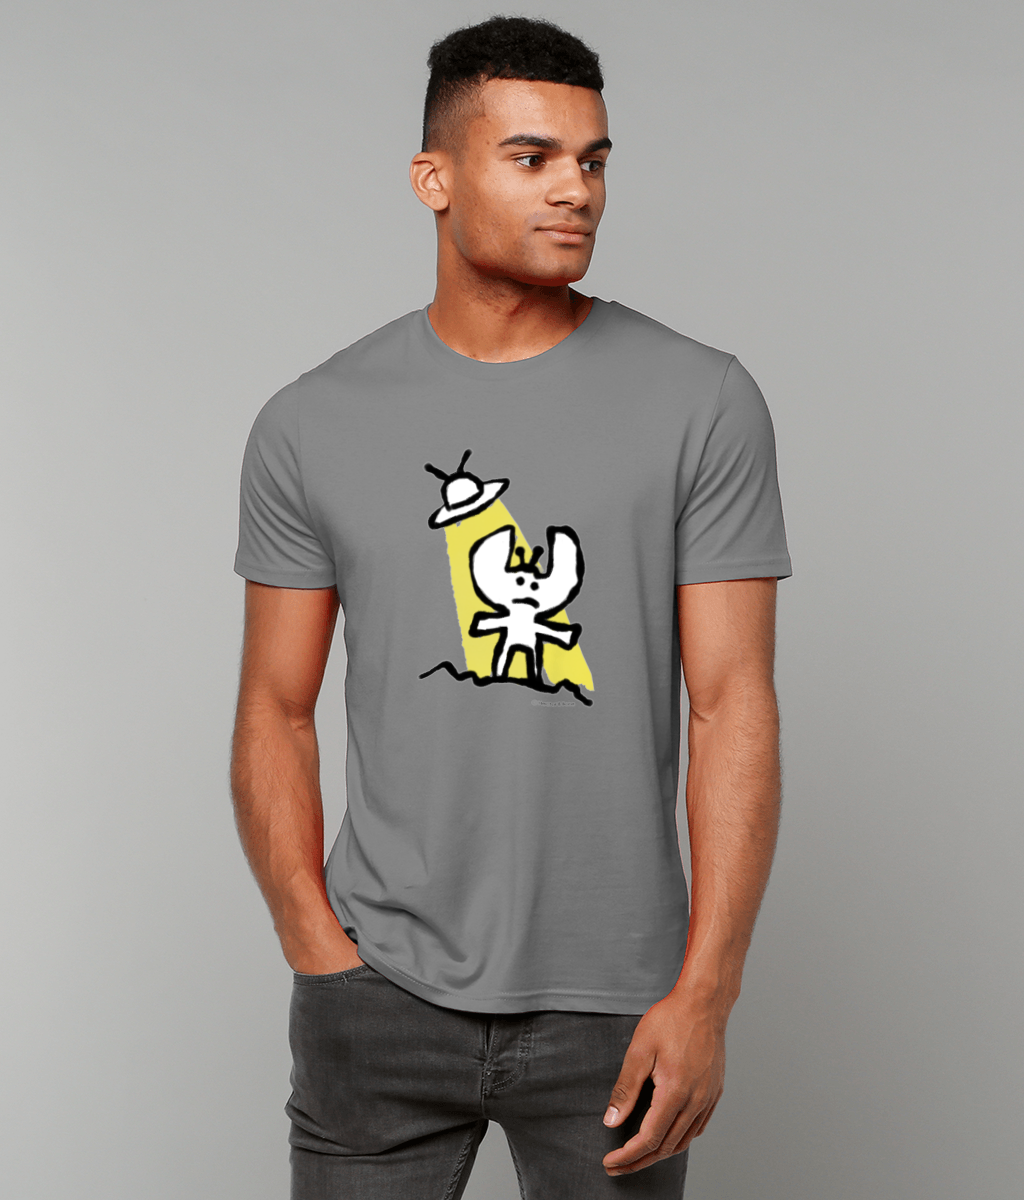 Alien T-shirt - Young man casually wearing a cute Alien t-shirt illustrated on a mid heather grey quality t-shirt by Hector and Bone